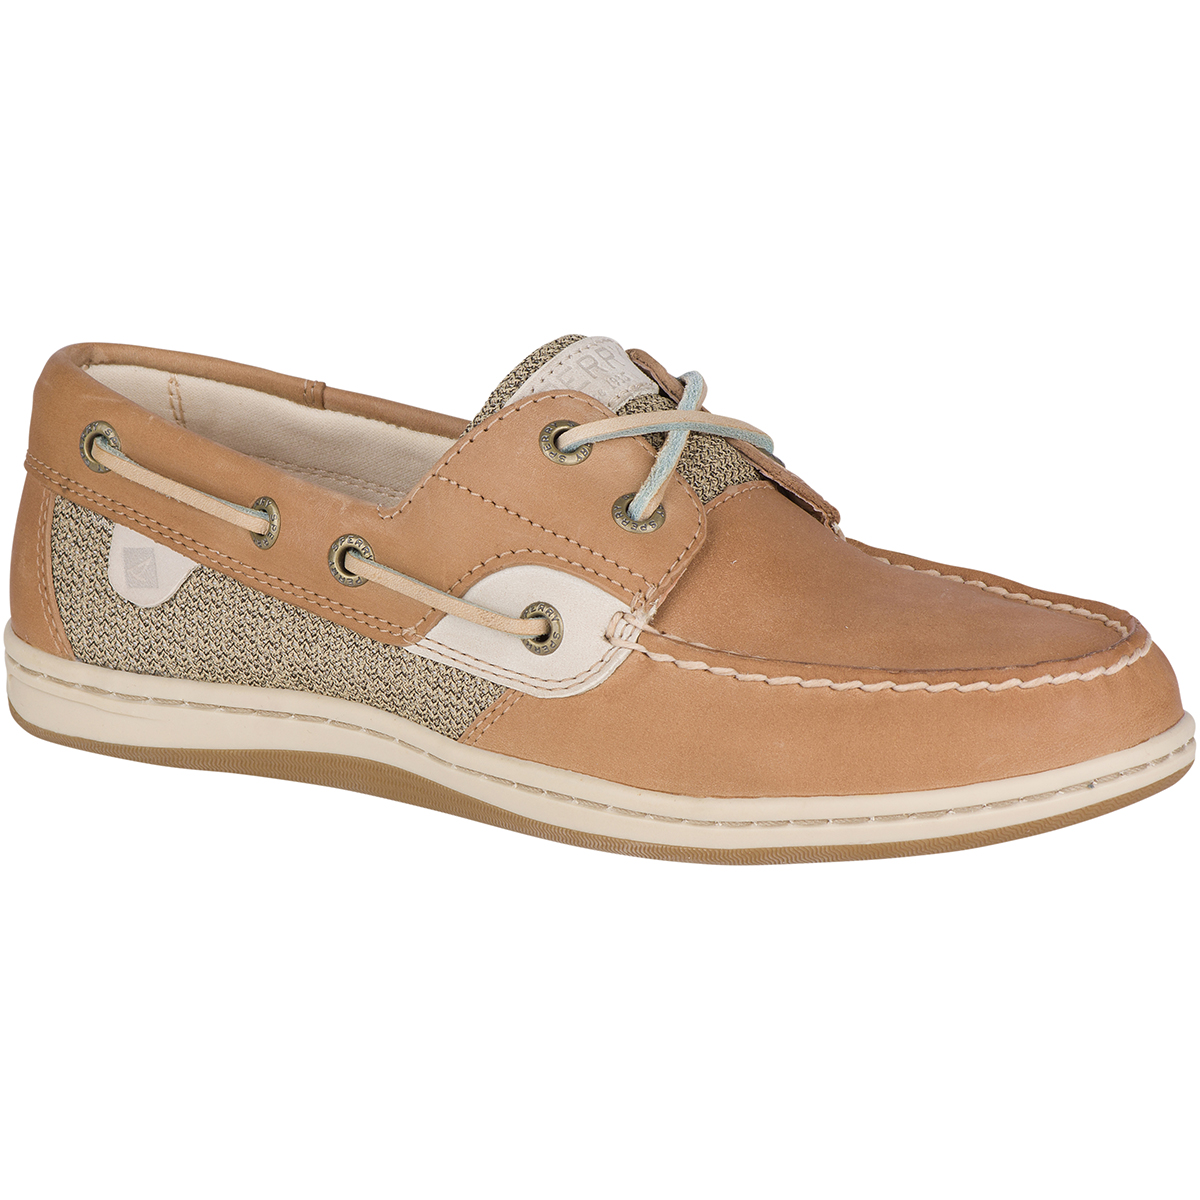 Sperry Women's Koifish Boat Shoes - Size 10